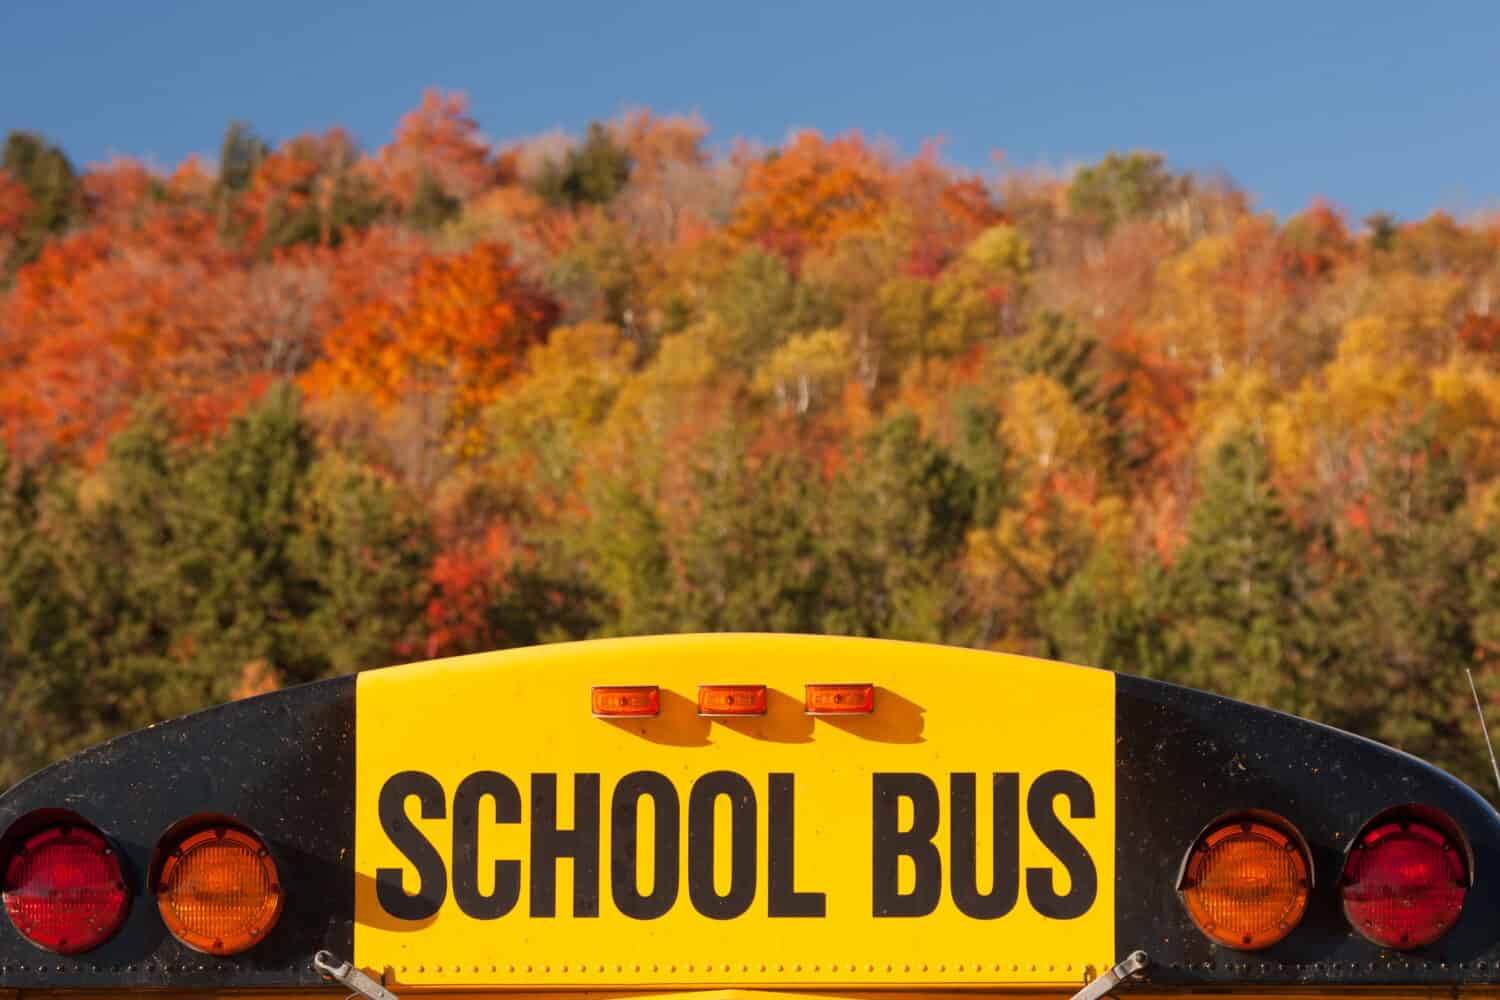 Top of a school bus on an autumn day., Stowe, Vermont, USA